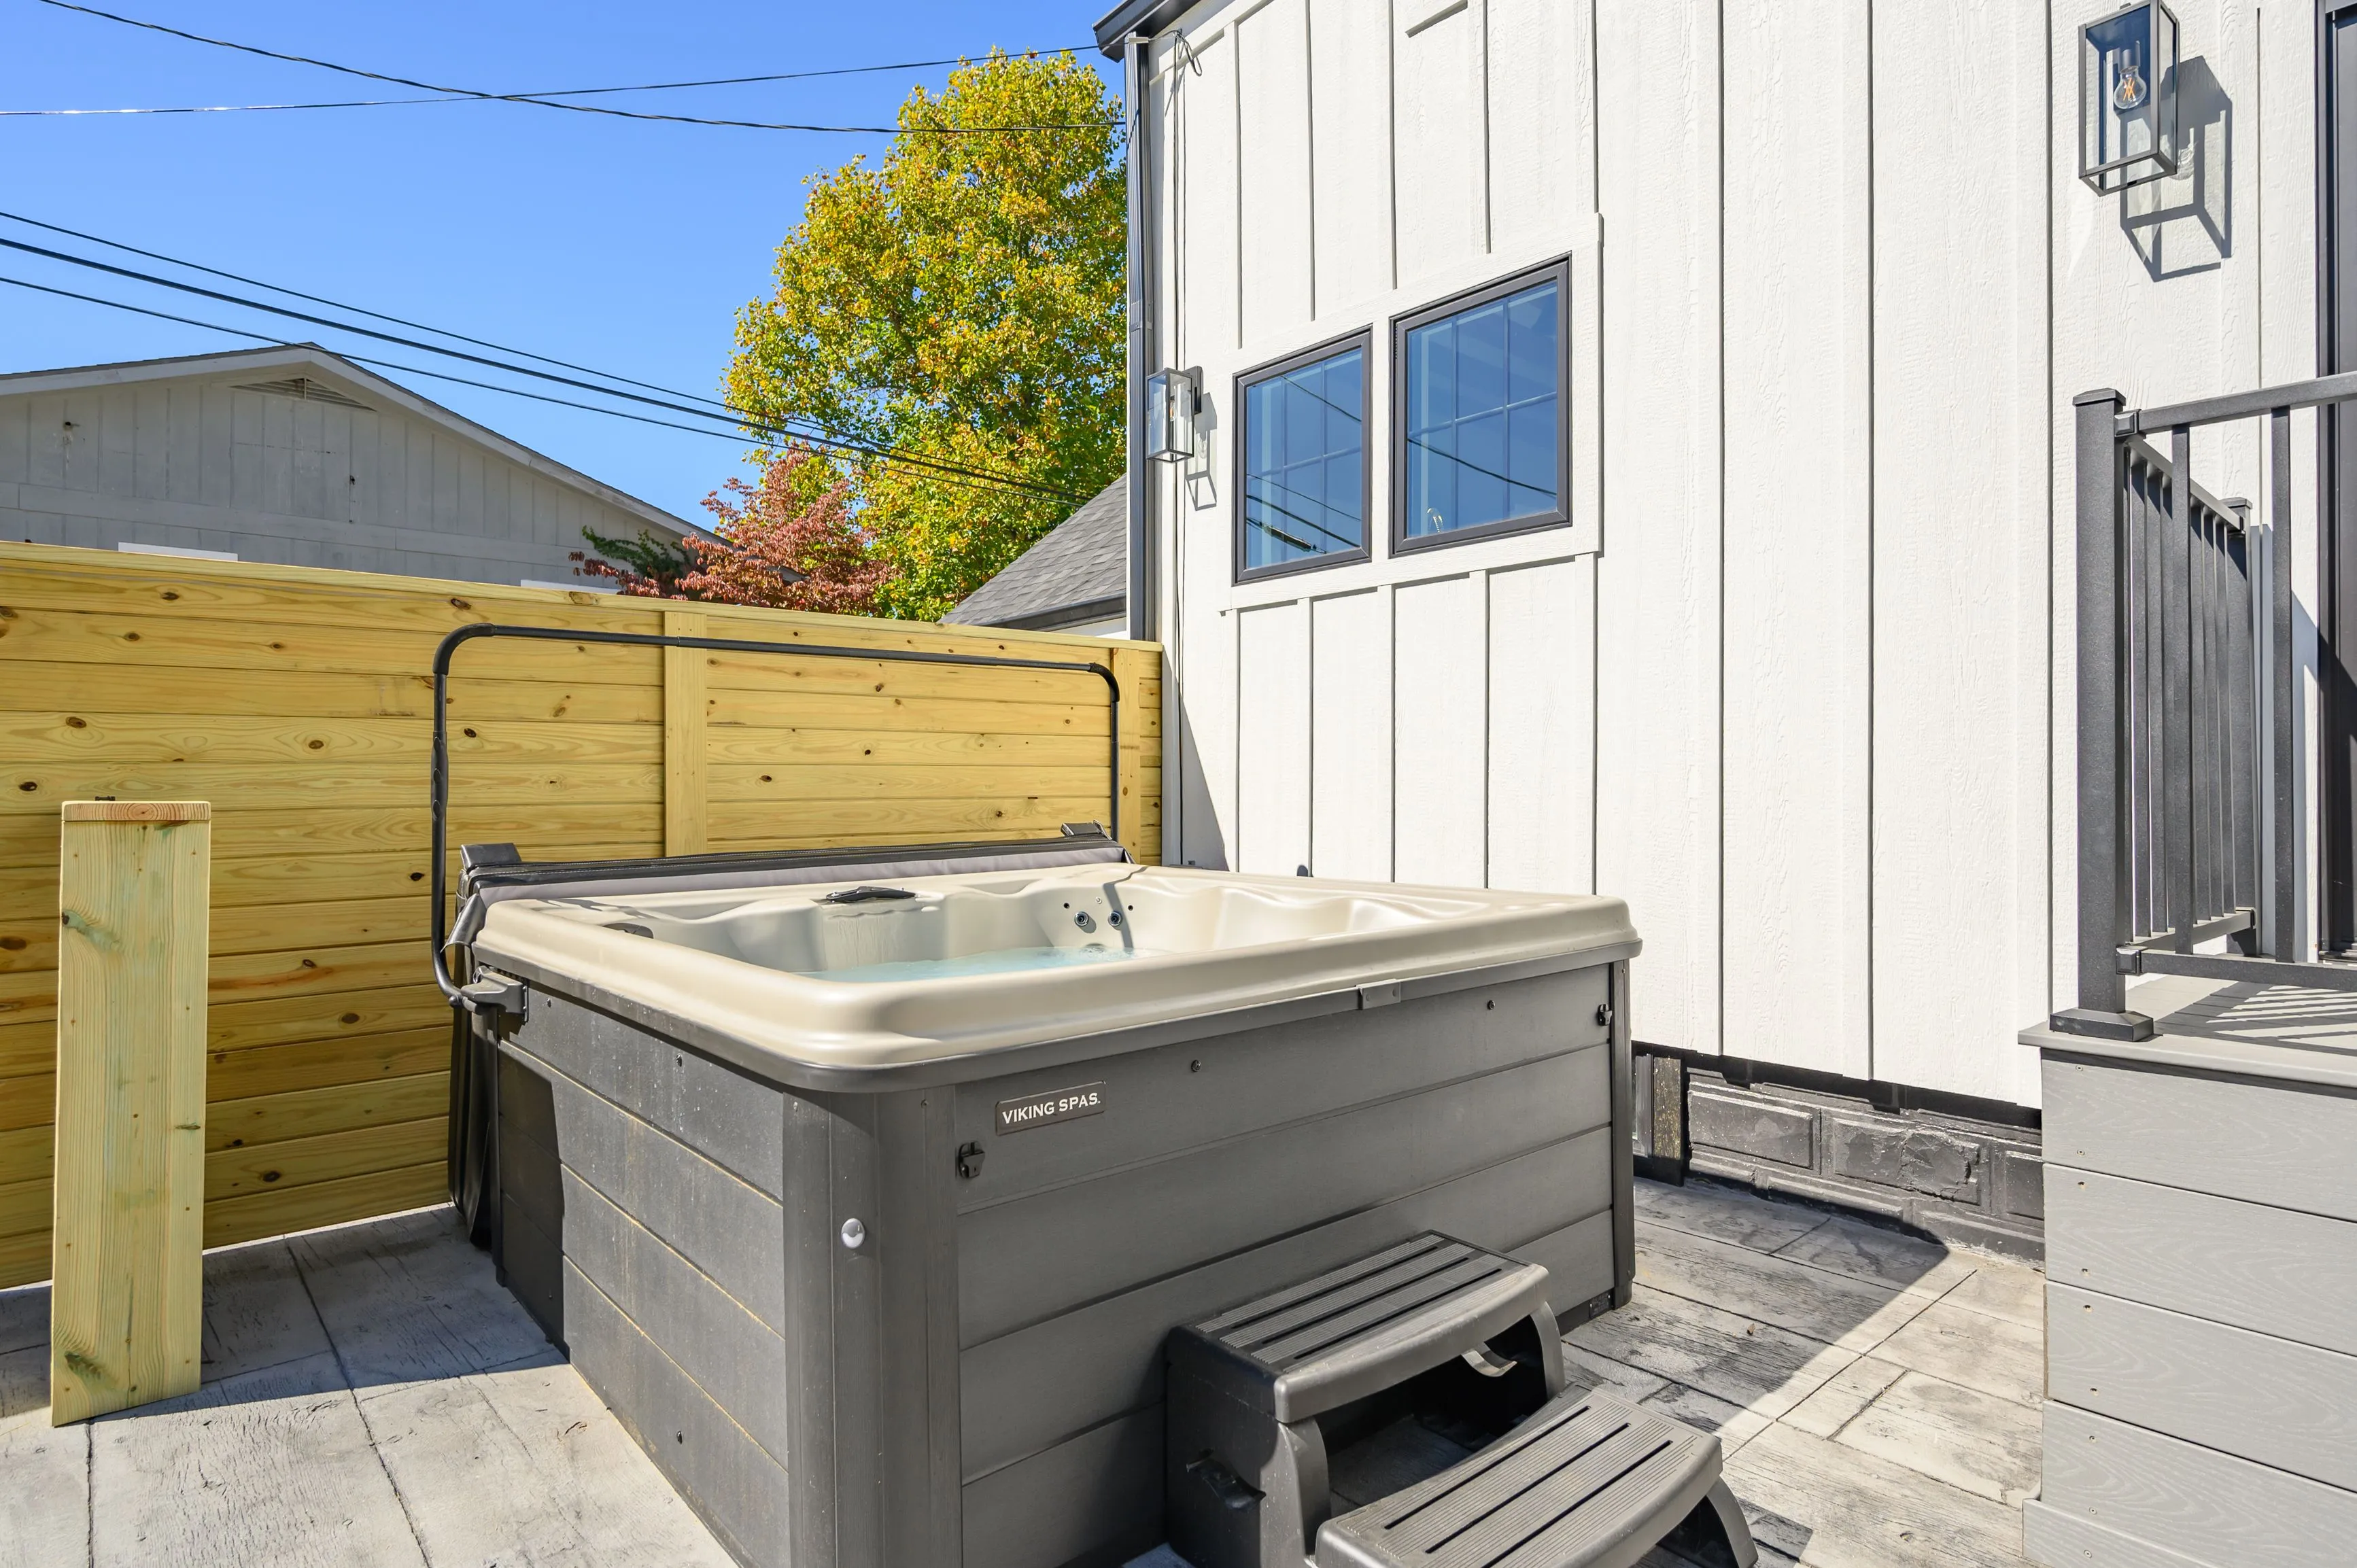 Outdoor residential hot tub with a closed cover on a wooden deck next to a wooden privacy fence, with a white exterior wall and windows in the background, on a sunny day.